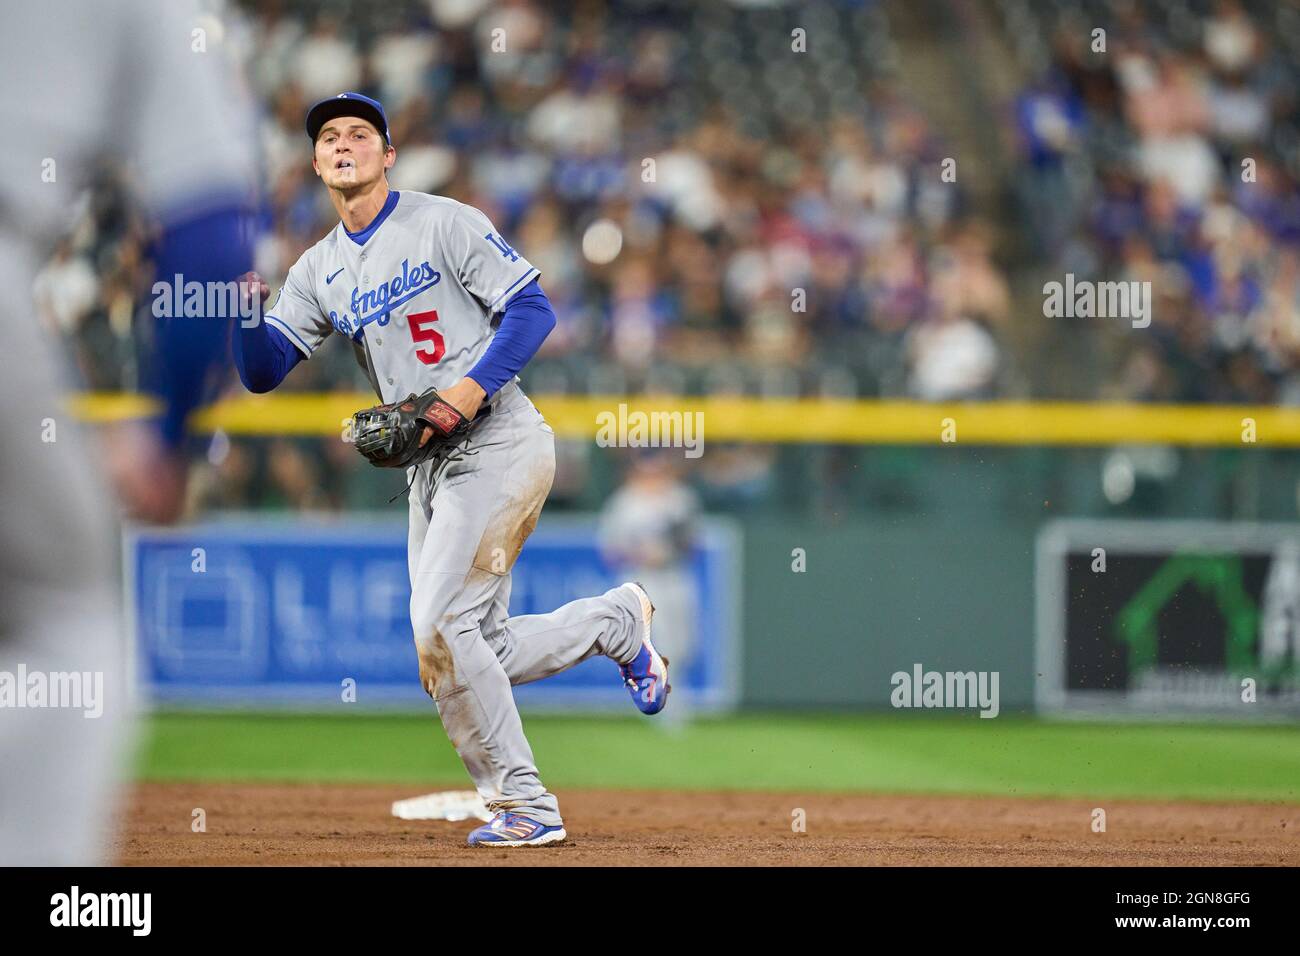 Corey Seager of the Los Angeles Dodgers smiles on the field during